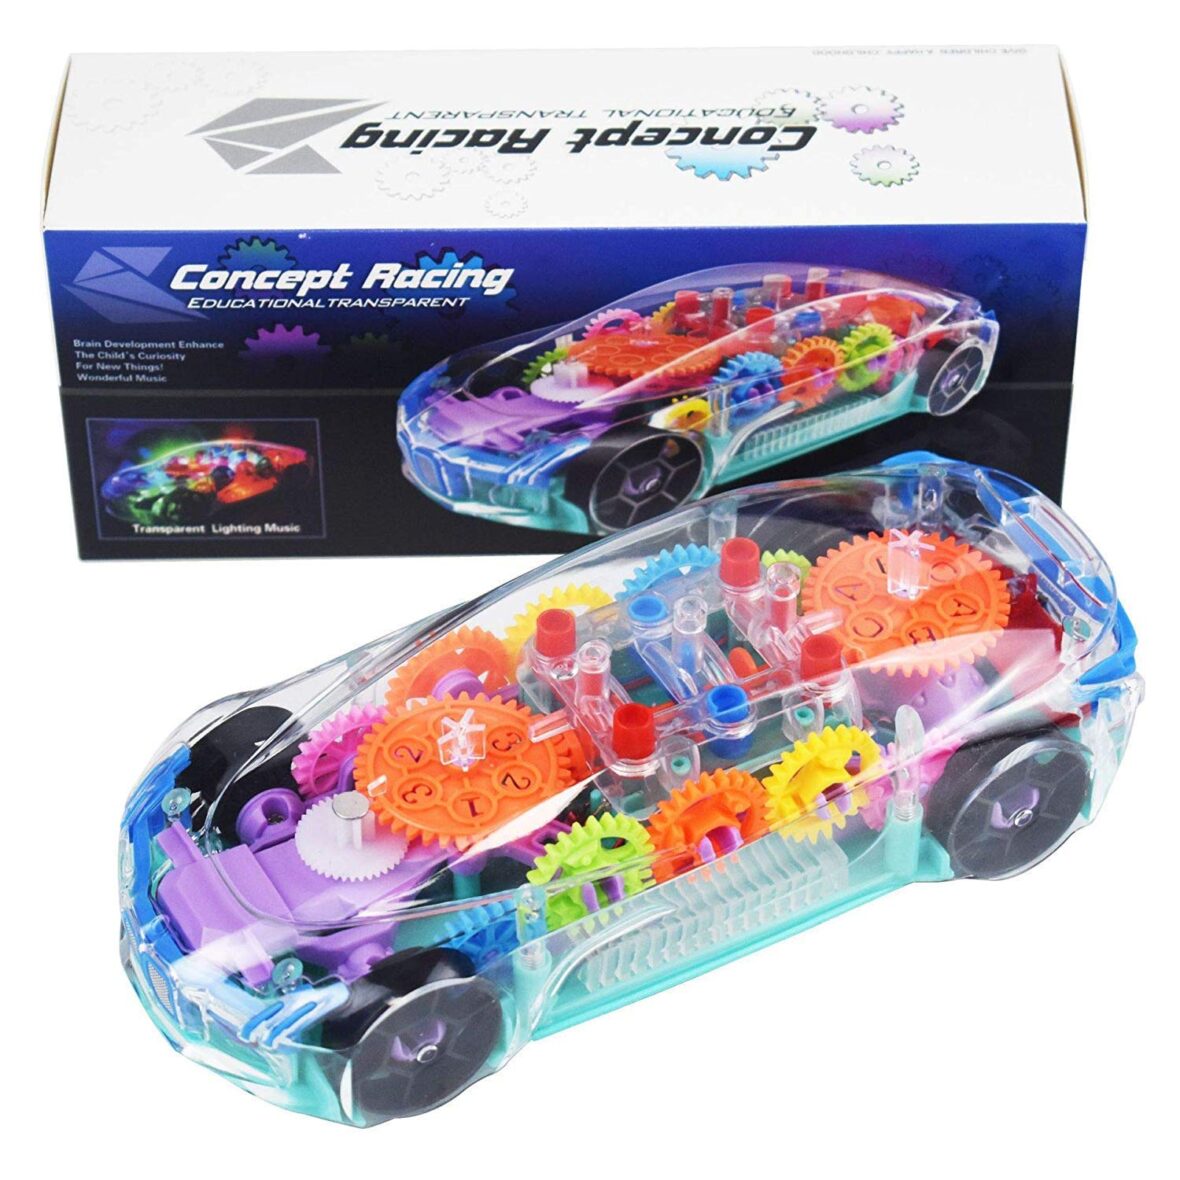 Concept Musical and 3D Lights Kids Transparent Car, Toy for 2-5 Year Kids Baby Toy (Battery Included)